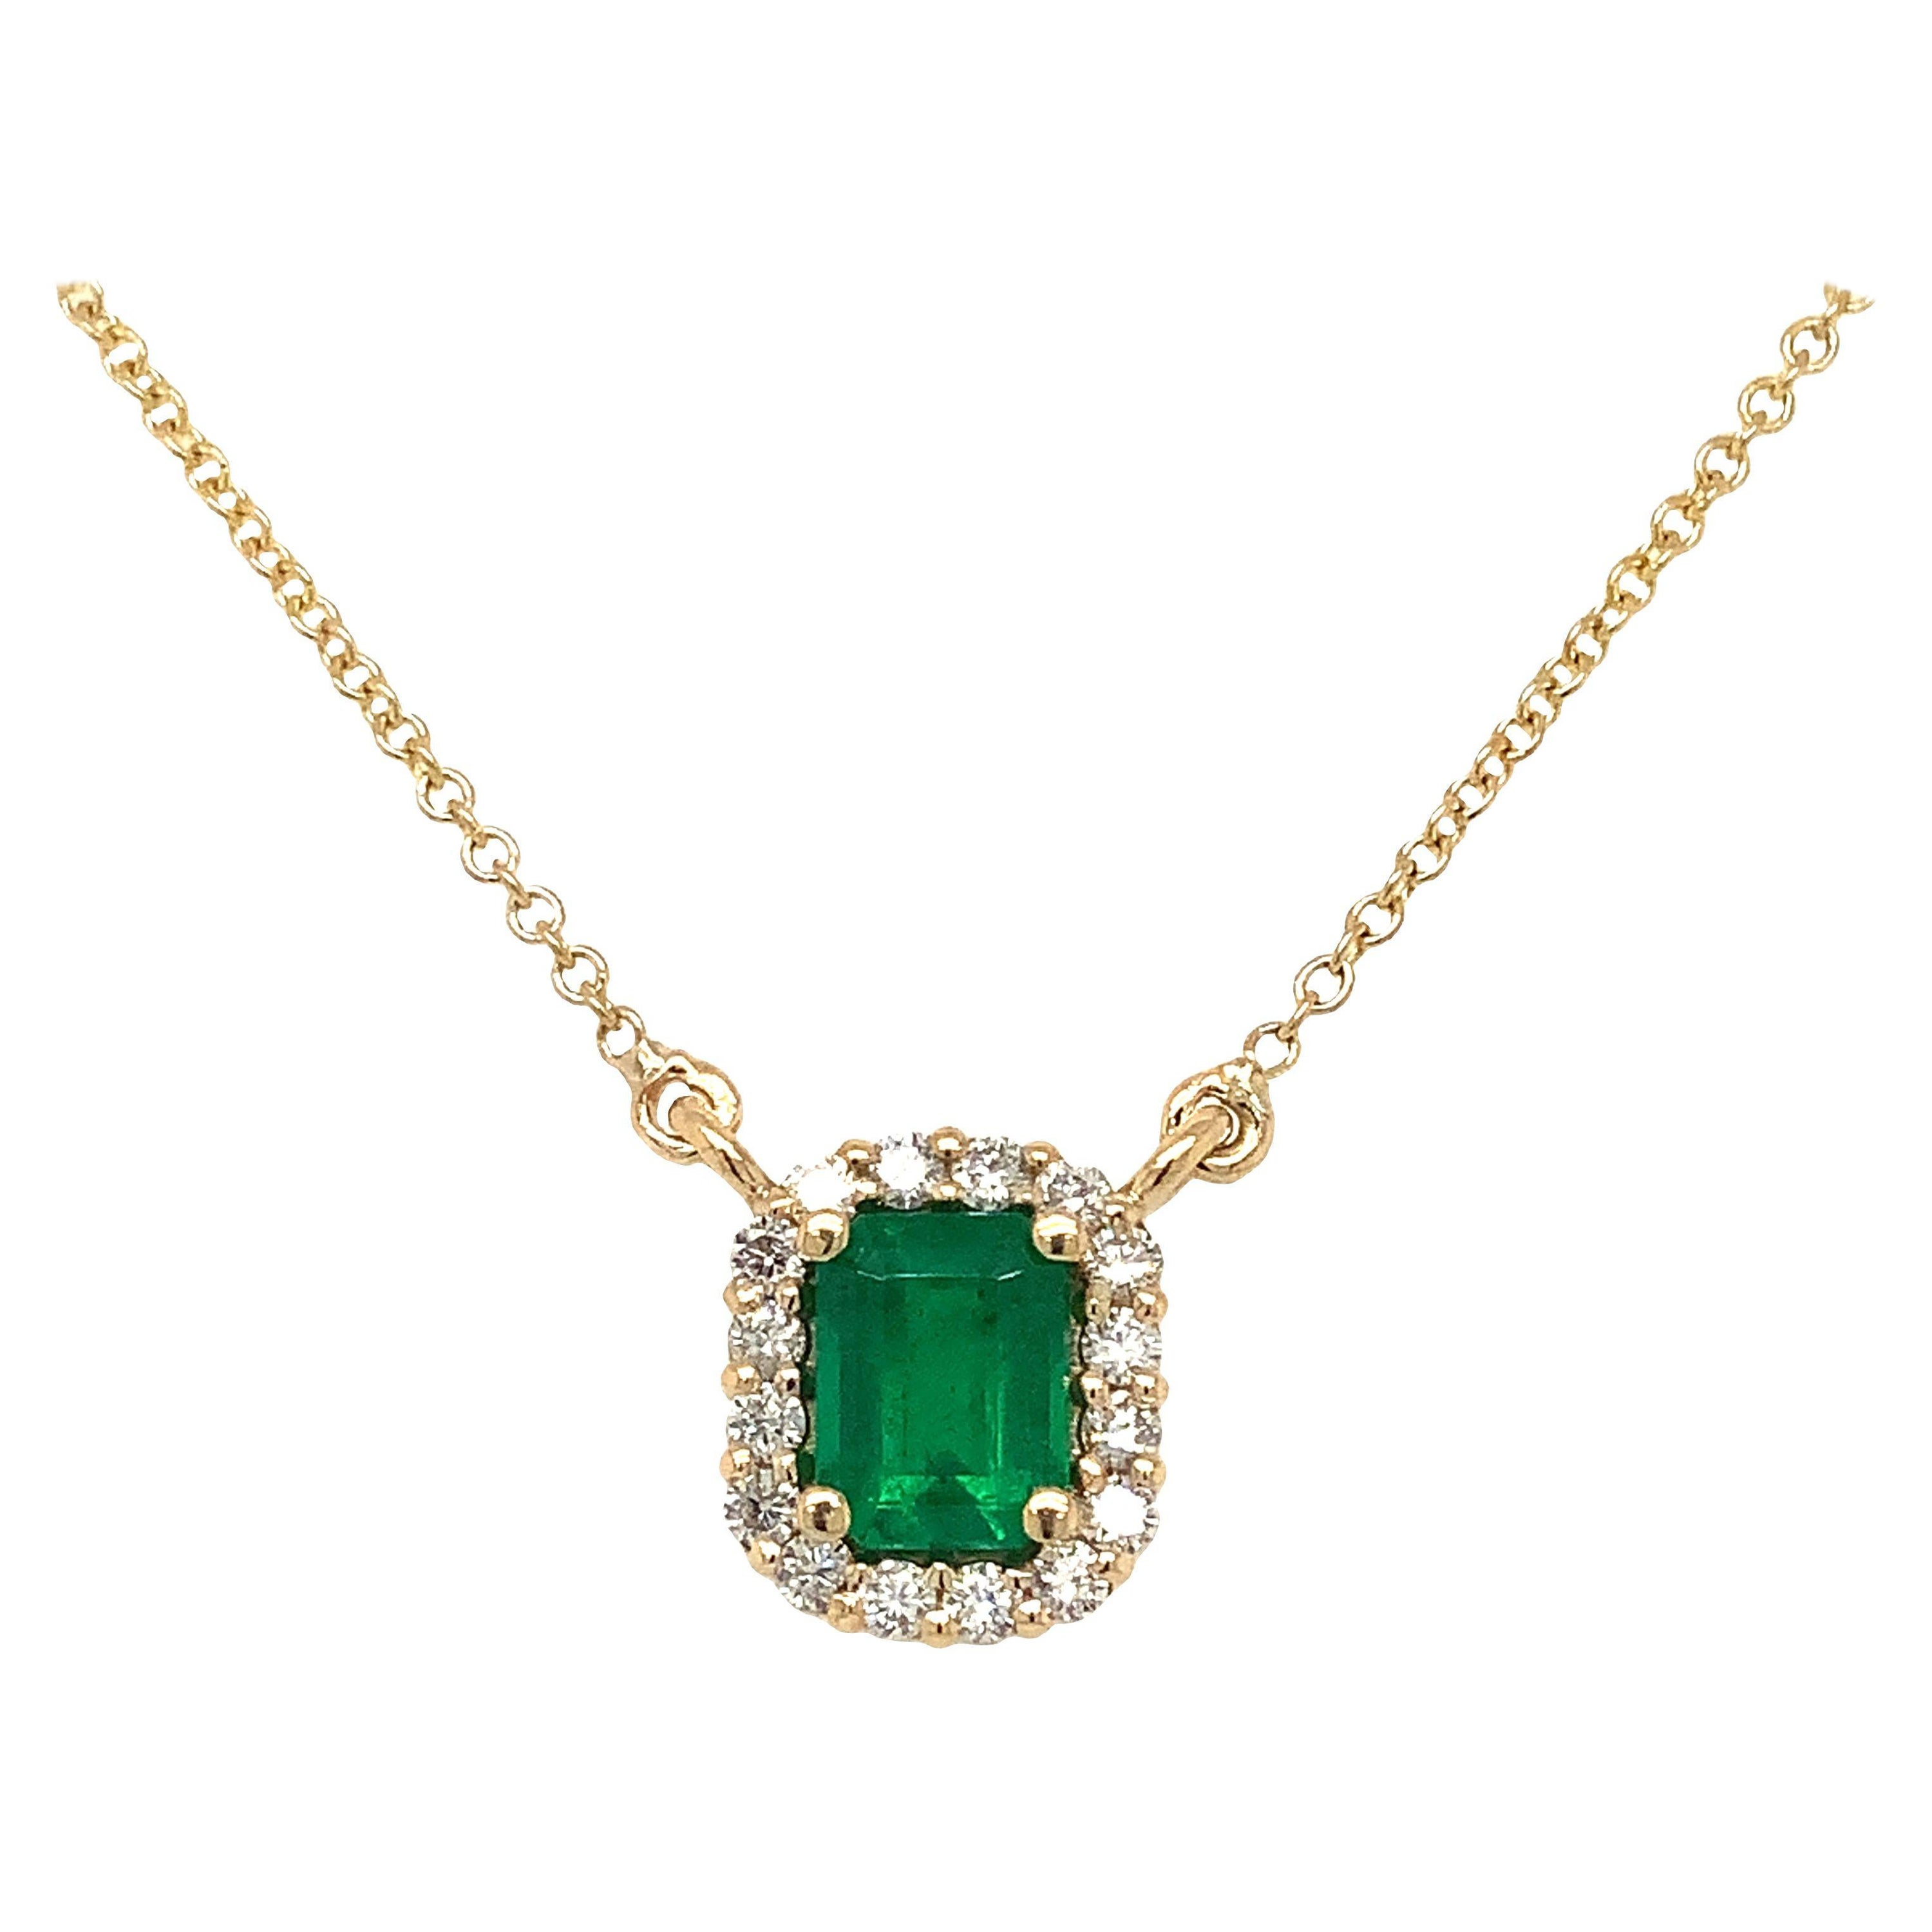 Elegant Emerald and Diamond Necklace Set in 18K Yellow Gold